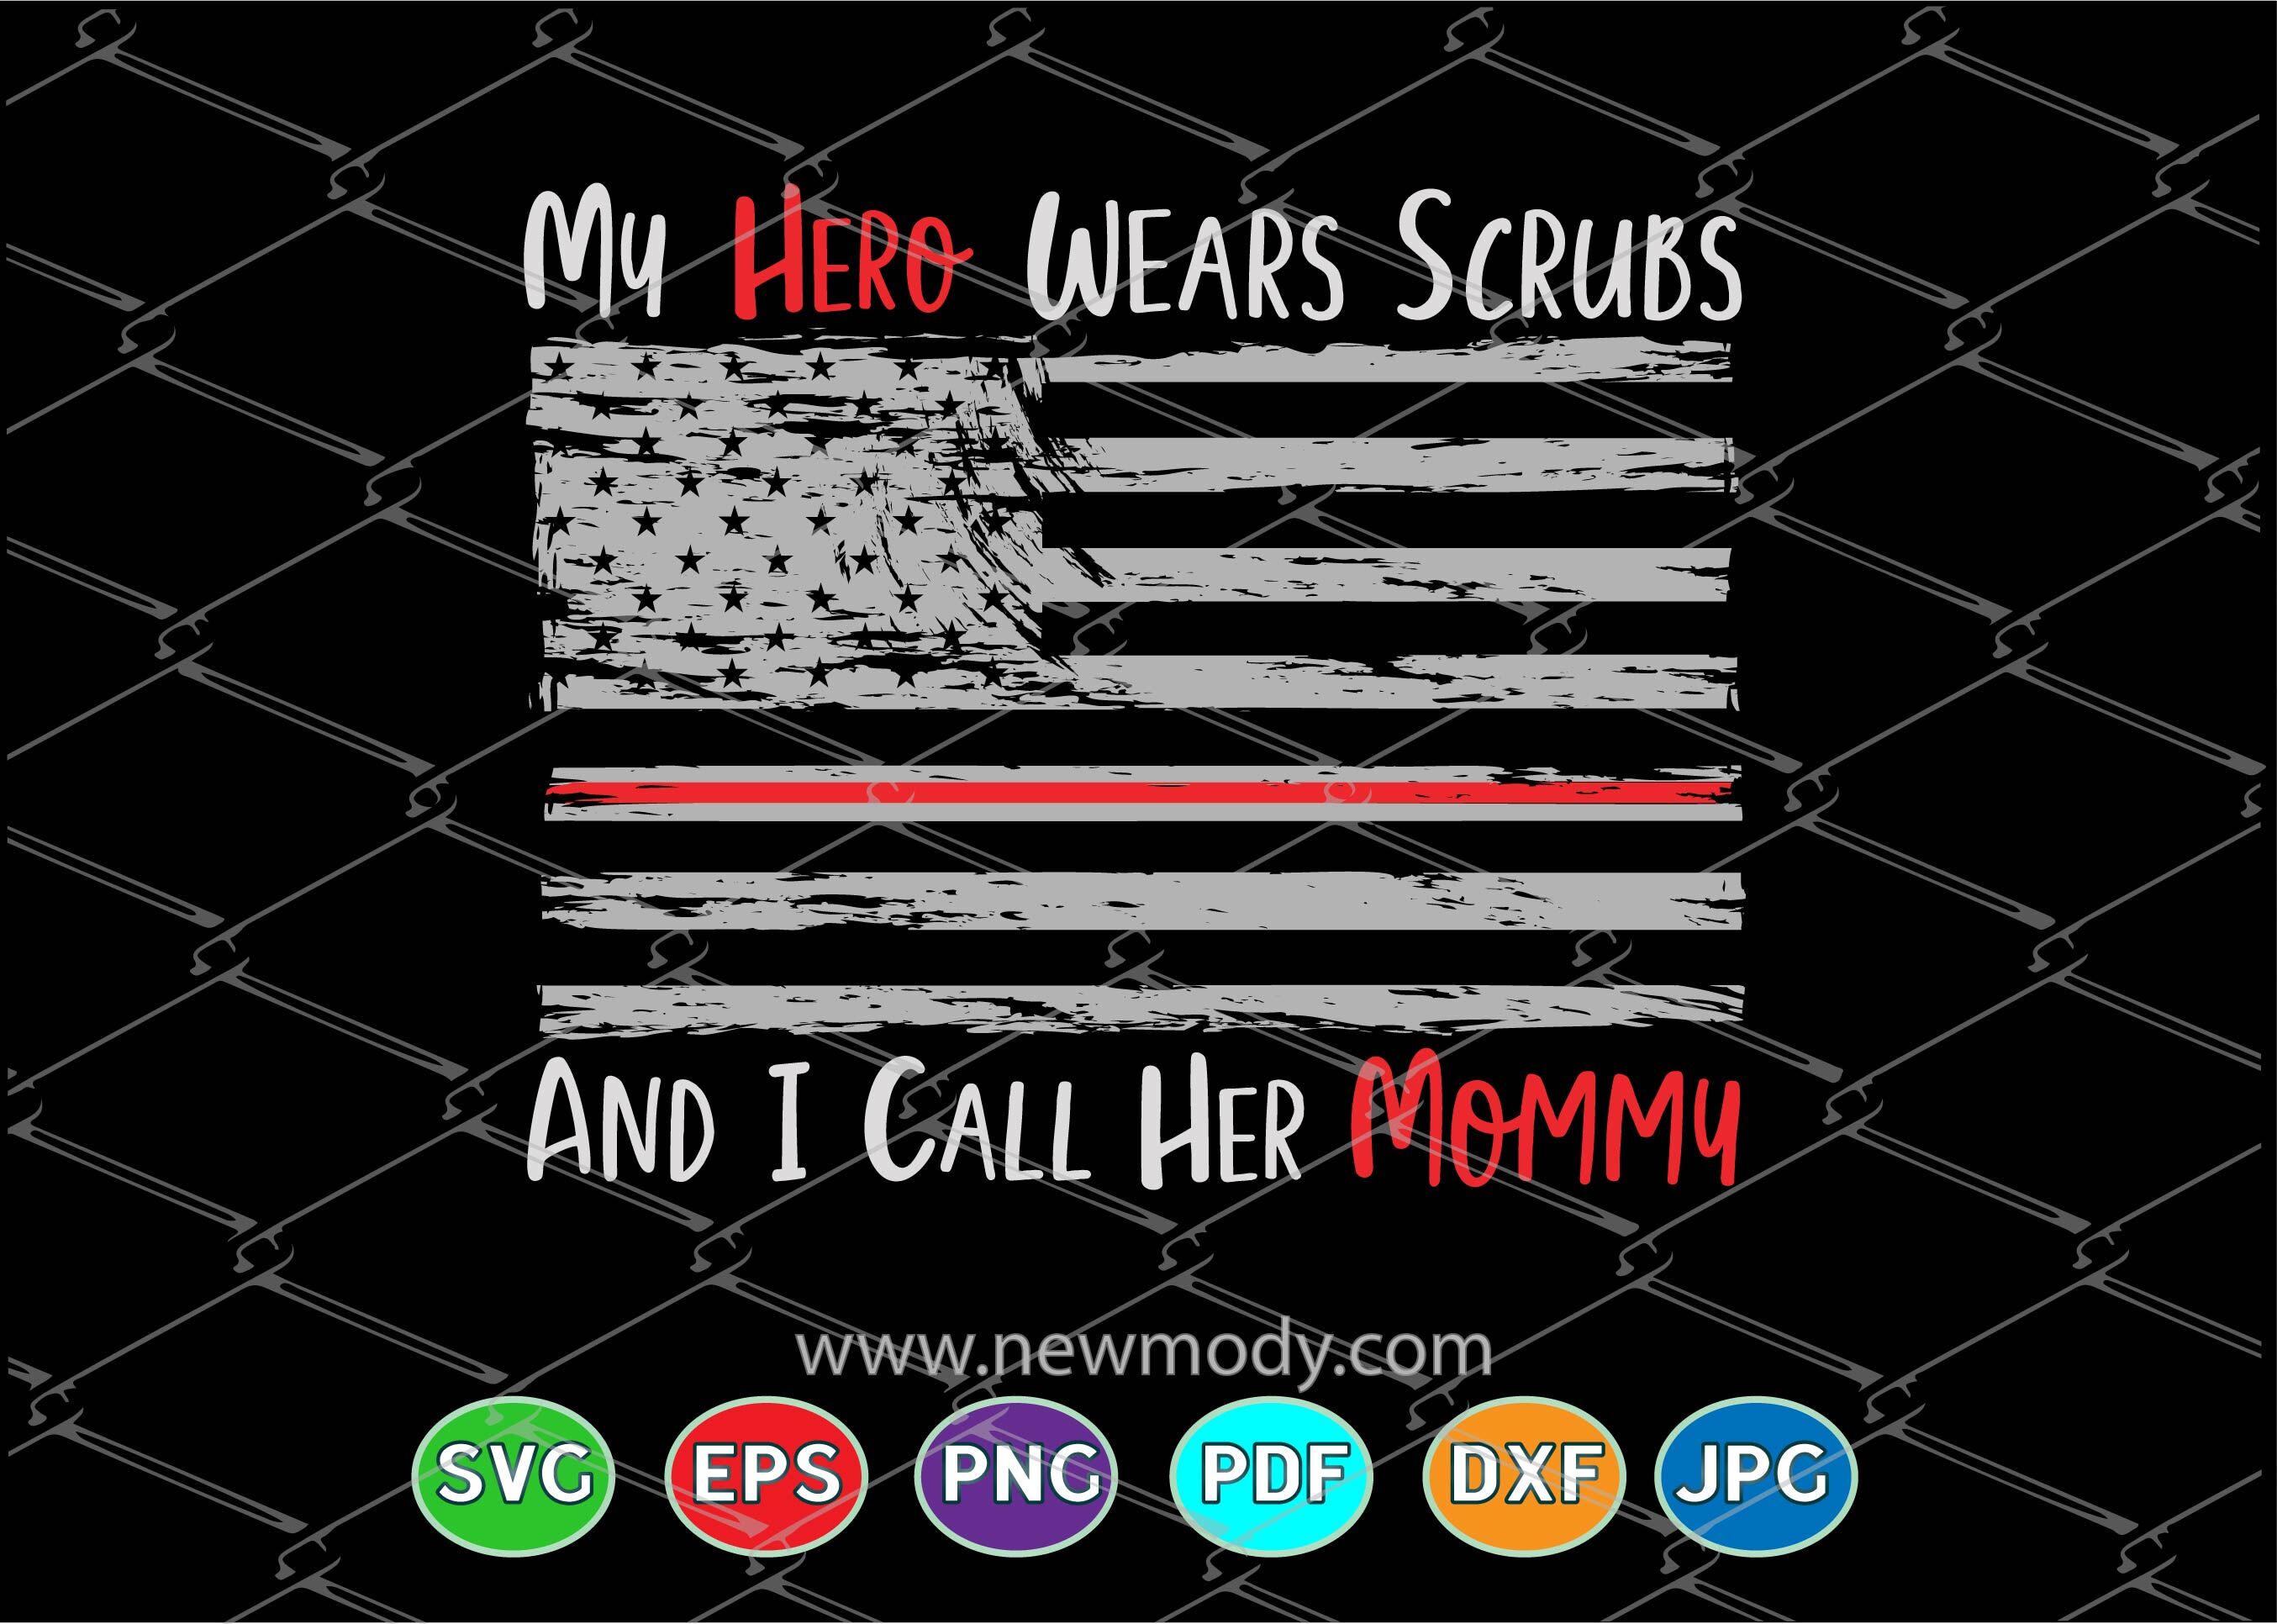 My Hero Wears Scrubs And I Call Her Mommy Svg Nurse Svg By Amittaart Thehungryjpeg 